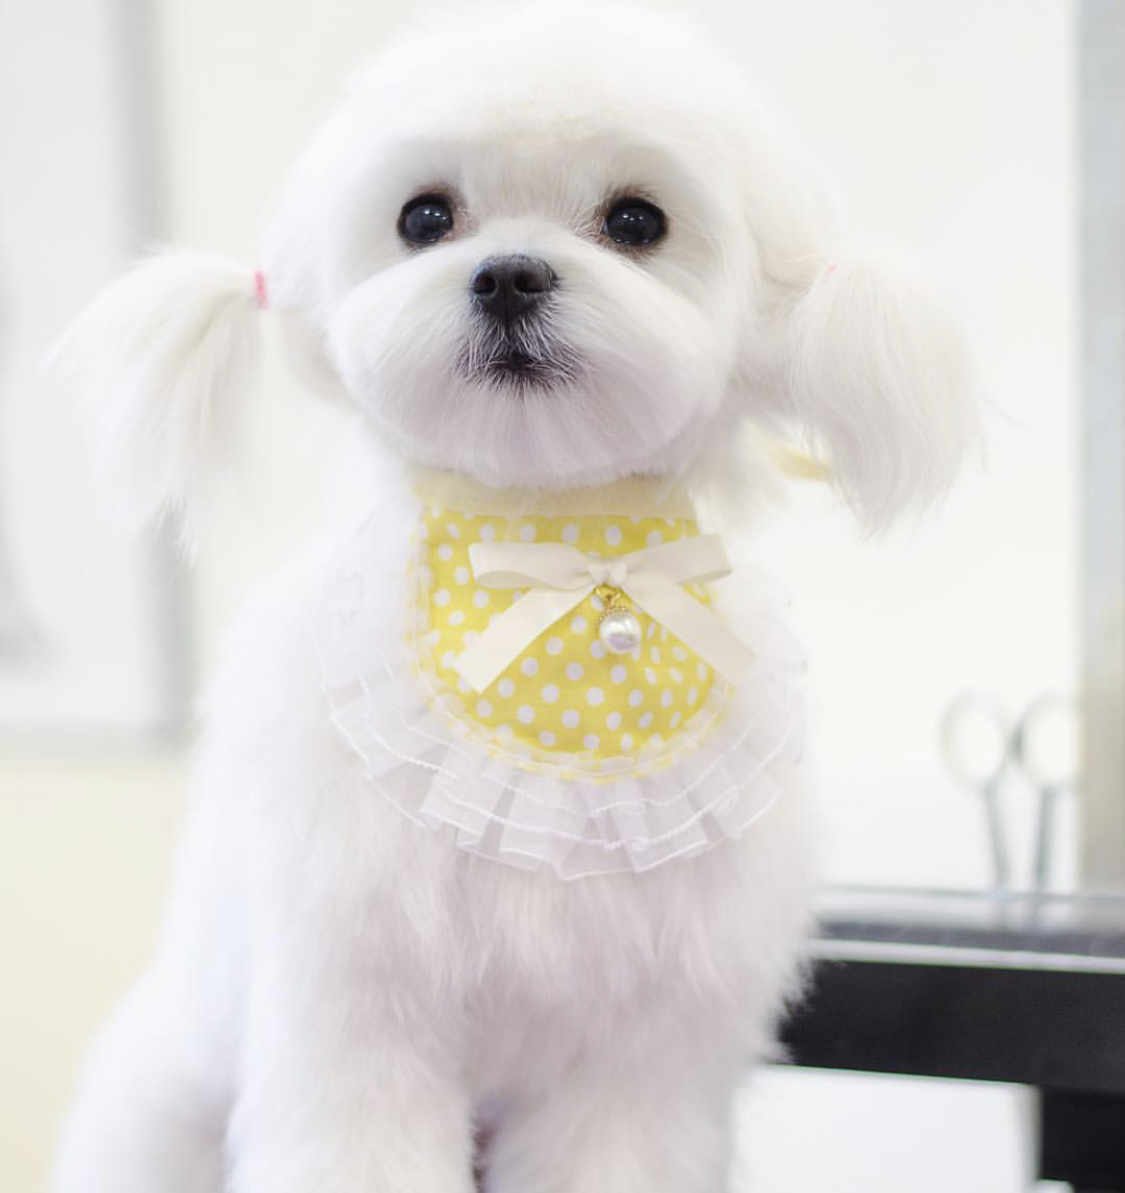 A Maltese wearing a cute yellow bib while sitting on the floor